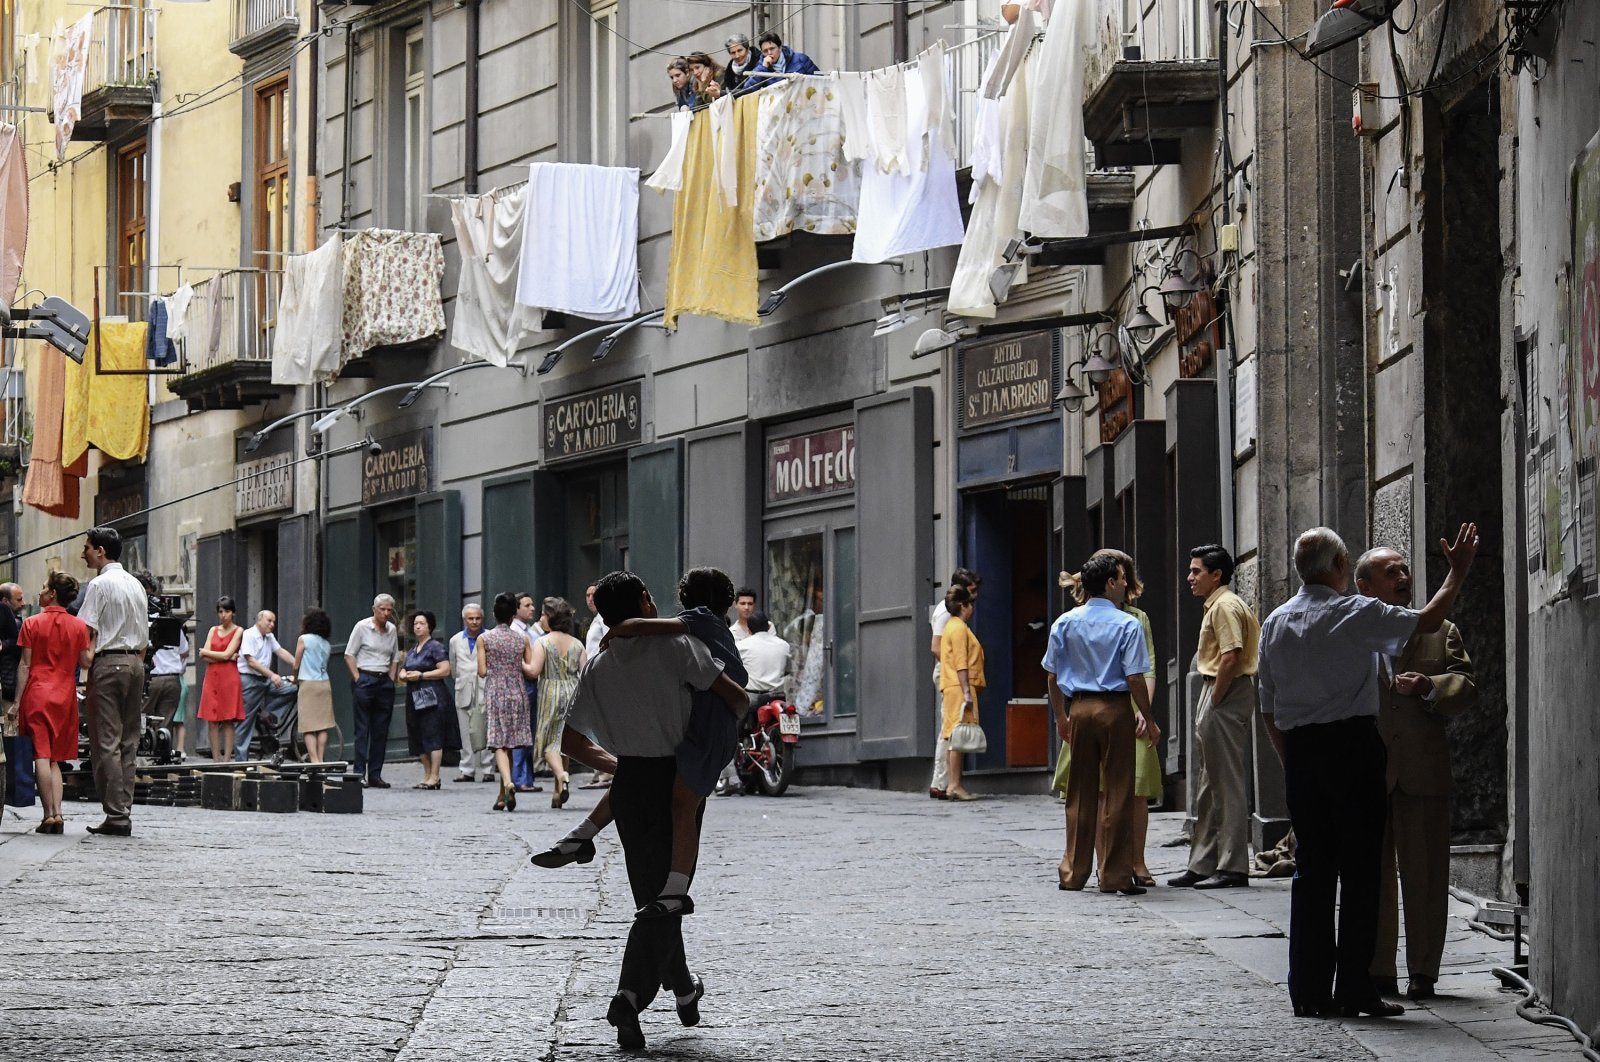 Extras walk along a crowded street on the set of the TV series "My Brilliant Friend" ("L'amica geniale") based on the novels of Elena Ferrante, in Naples, Italy, Jan. 13, 2021. (Getty Images)